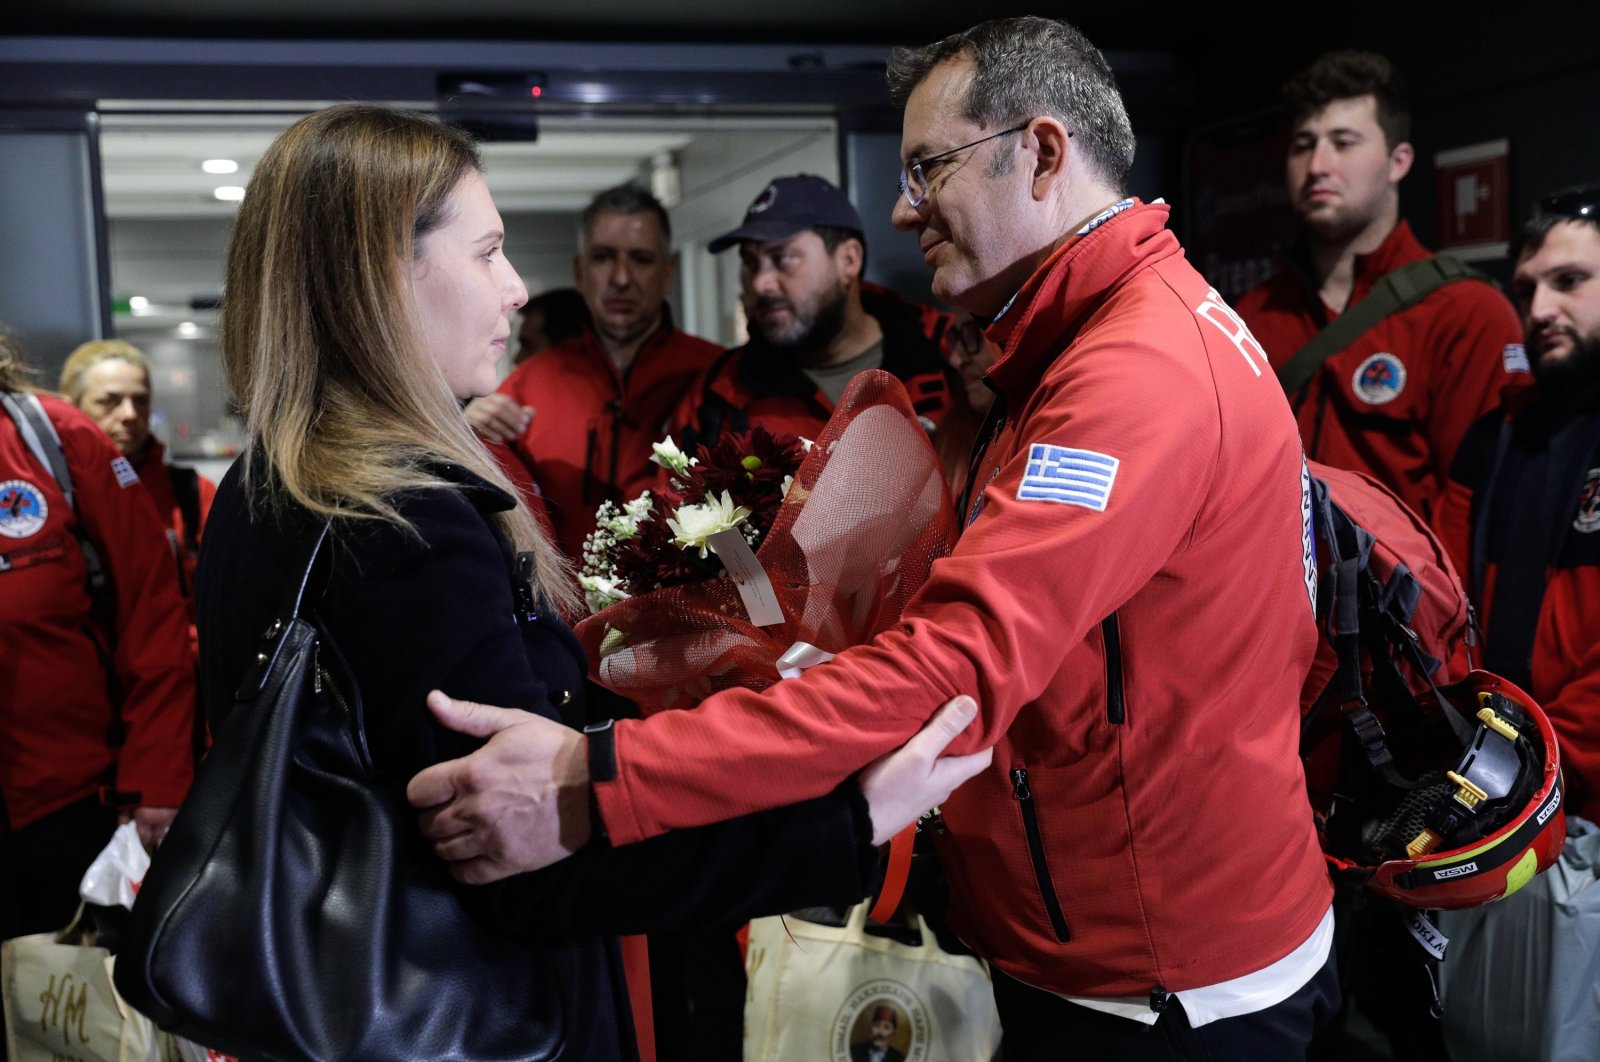 Gökçe Över (L), a Turkish consulate official in Thessaloniki, give flowers to Greek search and rescue teams who returned from Türkiye, in Thessaloniki, Greece, Feb. 16, 2023. (AA Photo)